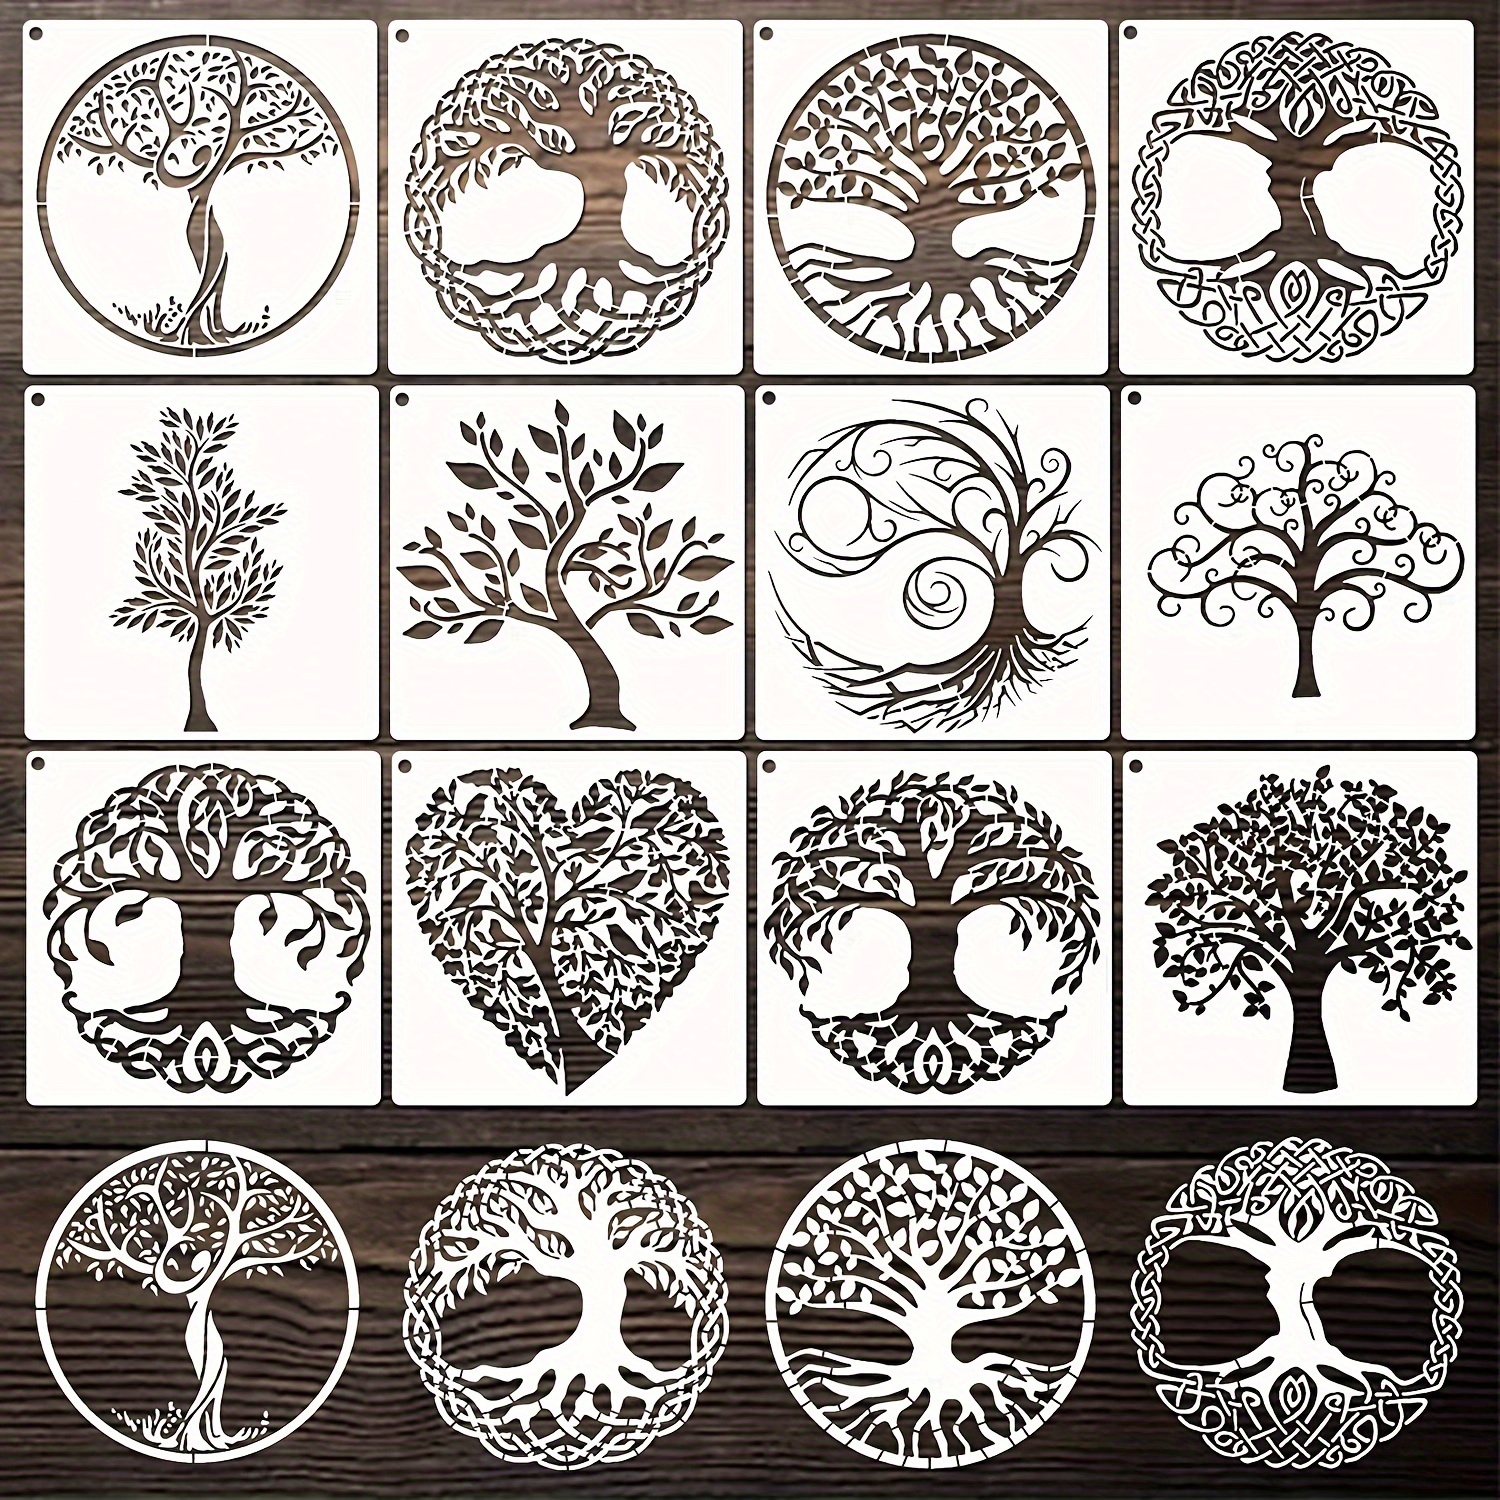 

12pcs Tree Stencils Tree Of Life Stencils For Painting On Wood Air Brush Natural Plants Small Palm Tree Painting Stencils For Canvas Wall Floor Decoration Diy Art Crafts And Decoration